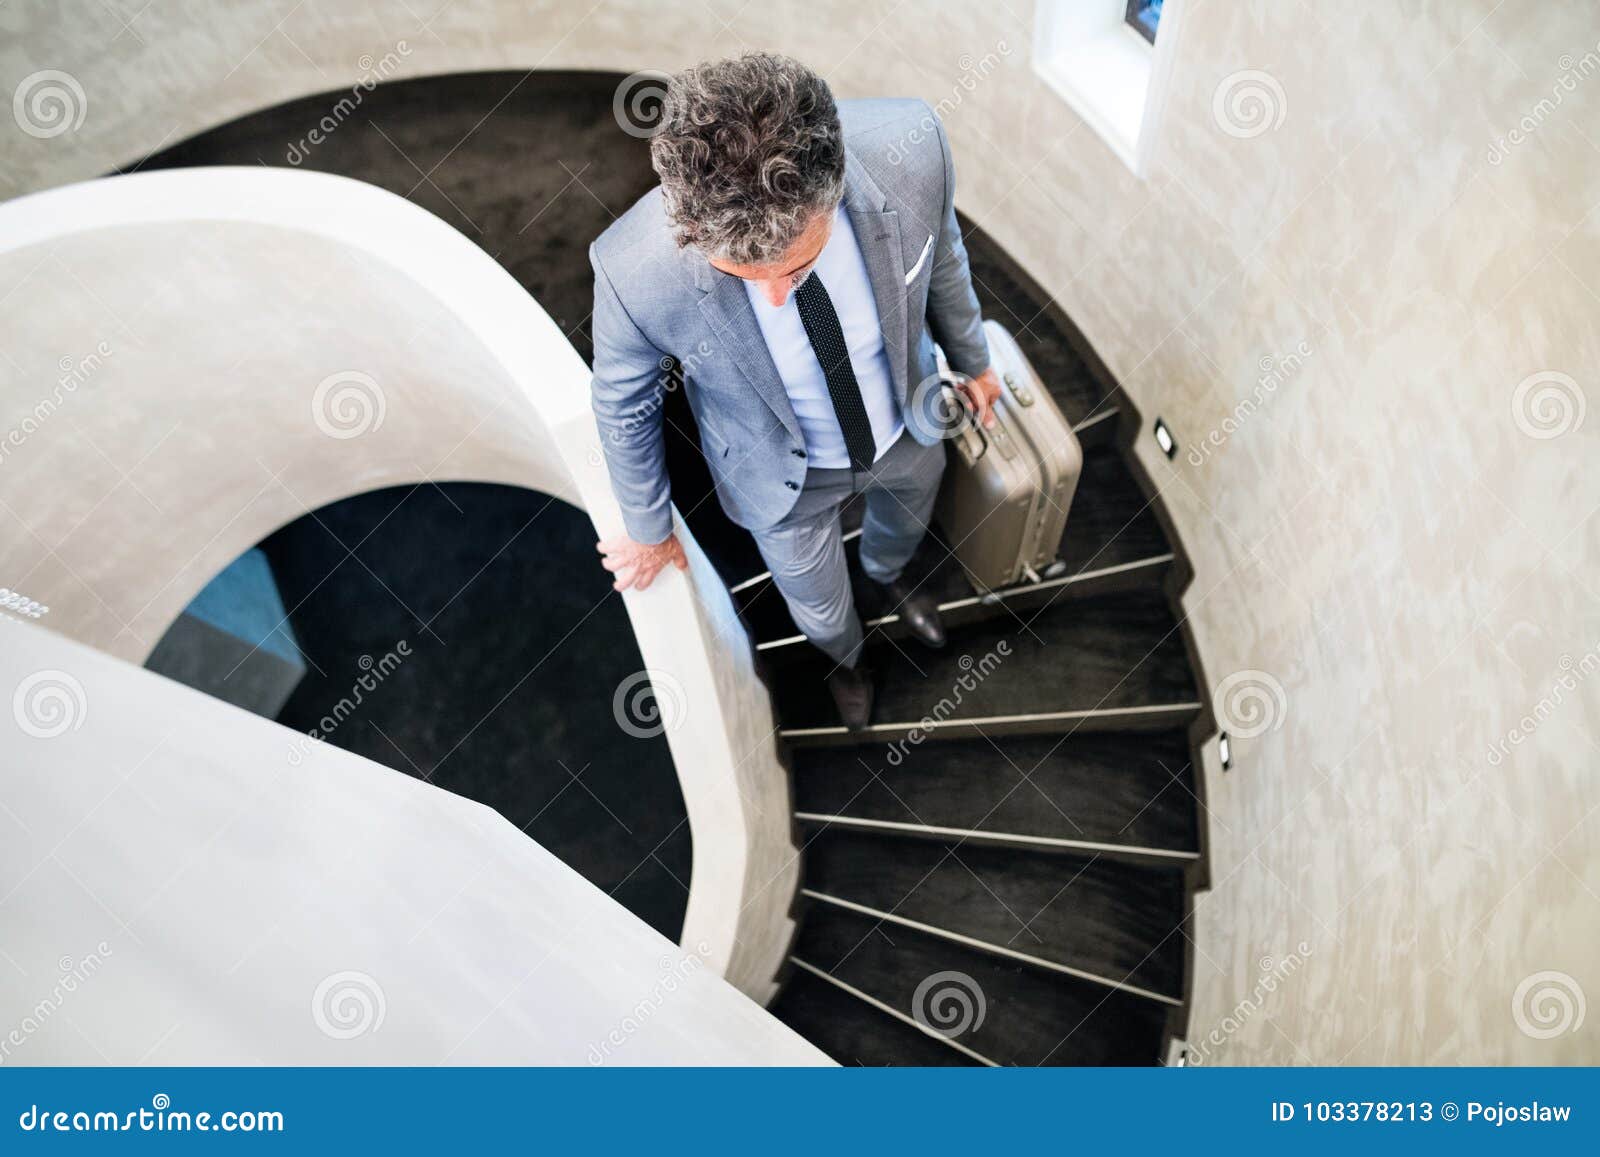 Businessman with Suitcase Walking Down the Stairs. Stock Image - Image